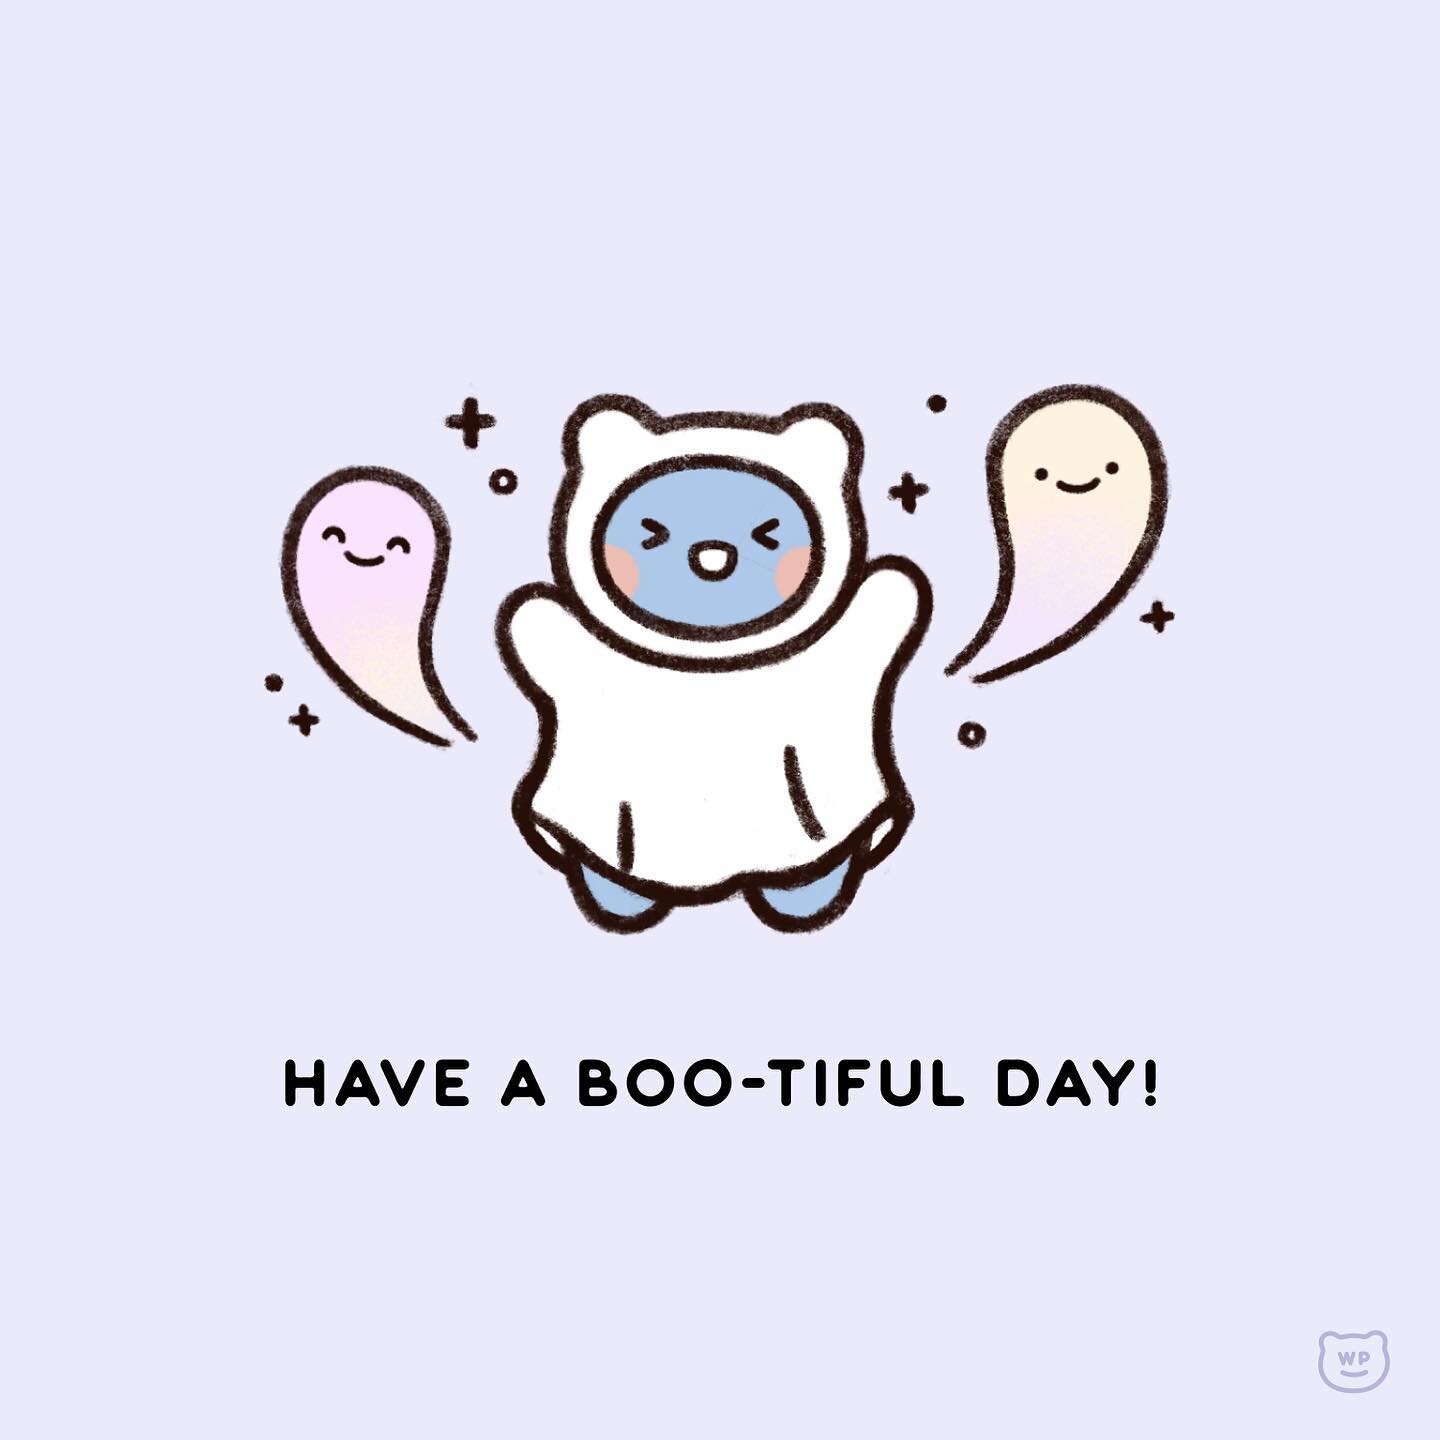 HAVE A BOO-TIFUL DAY! 👻👻👻